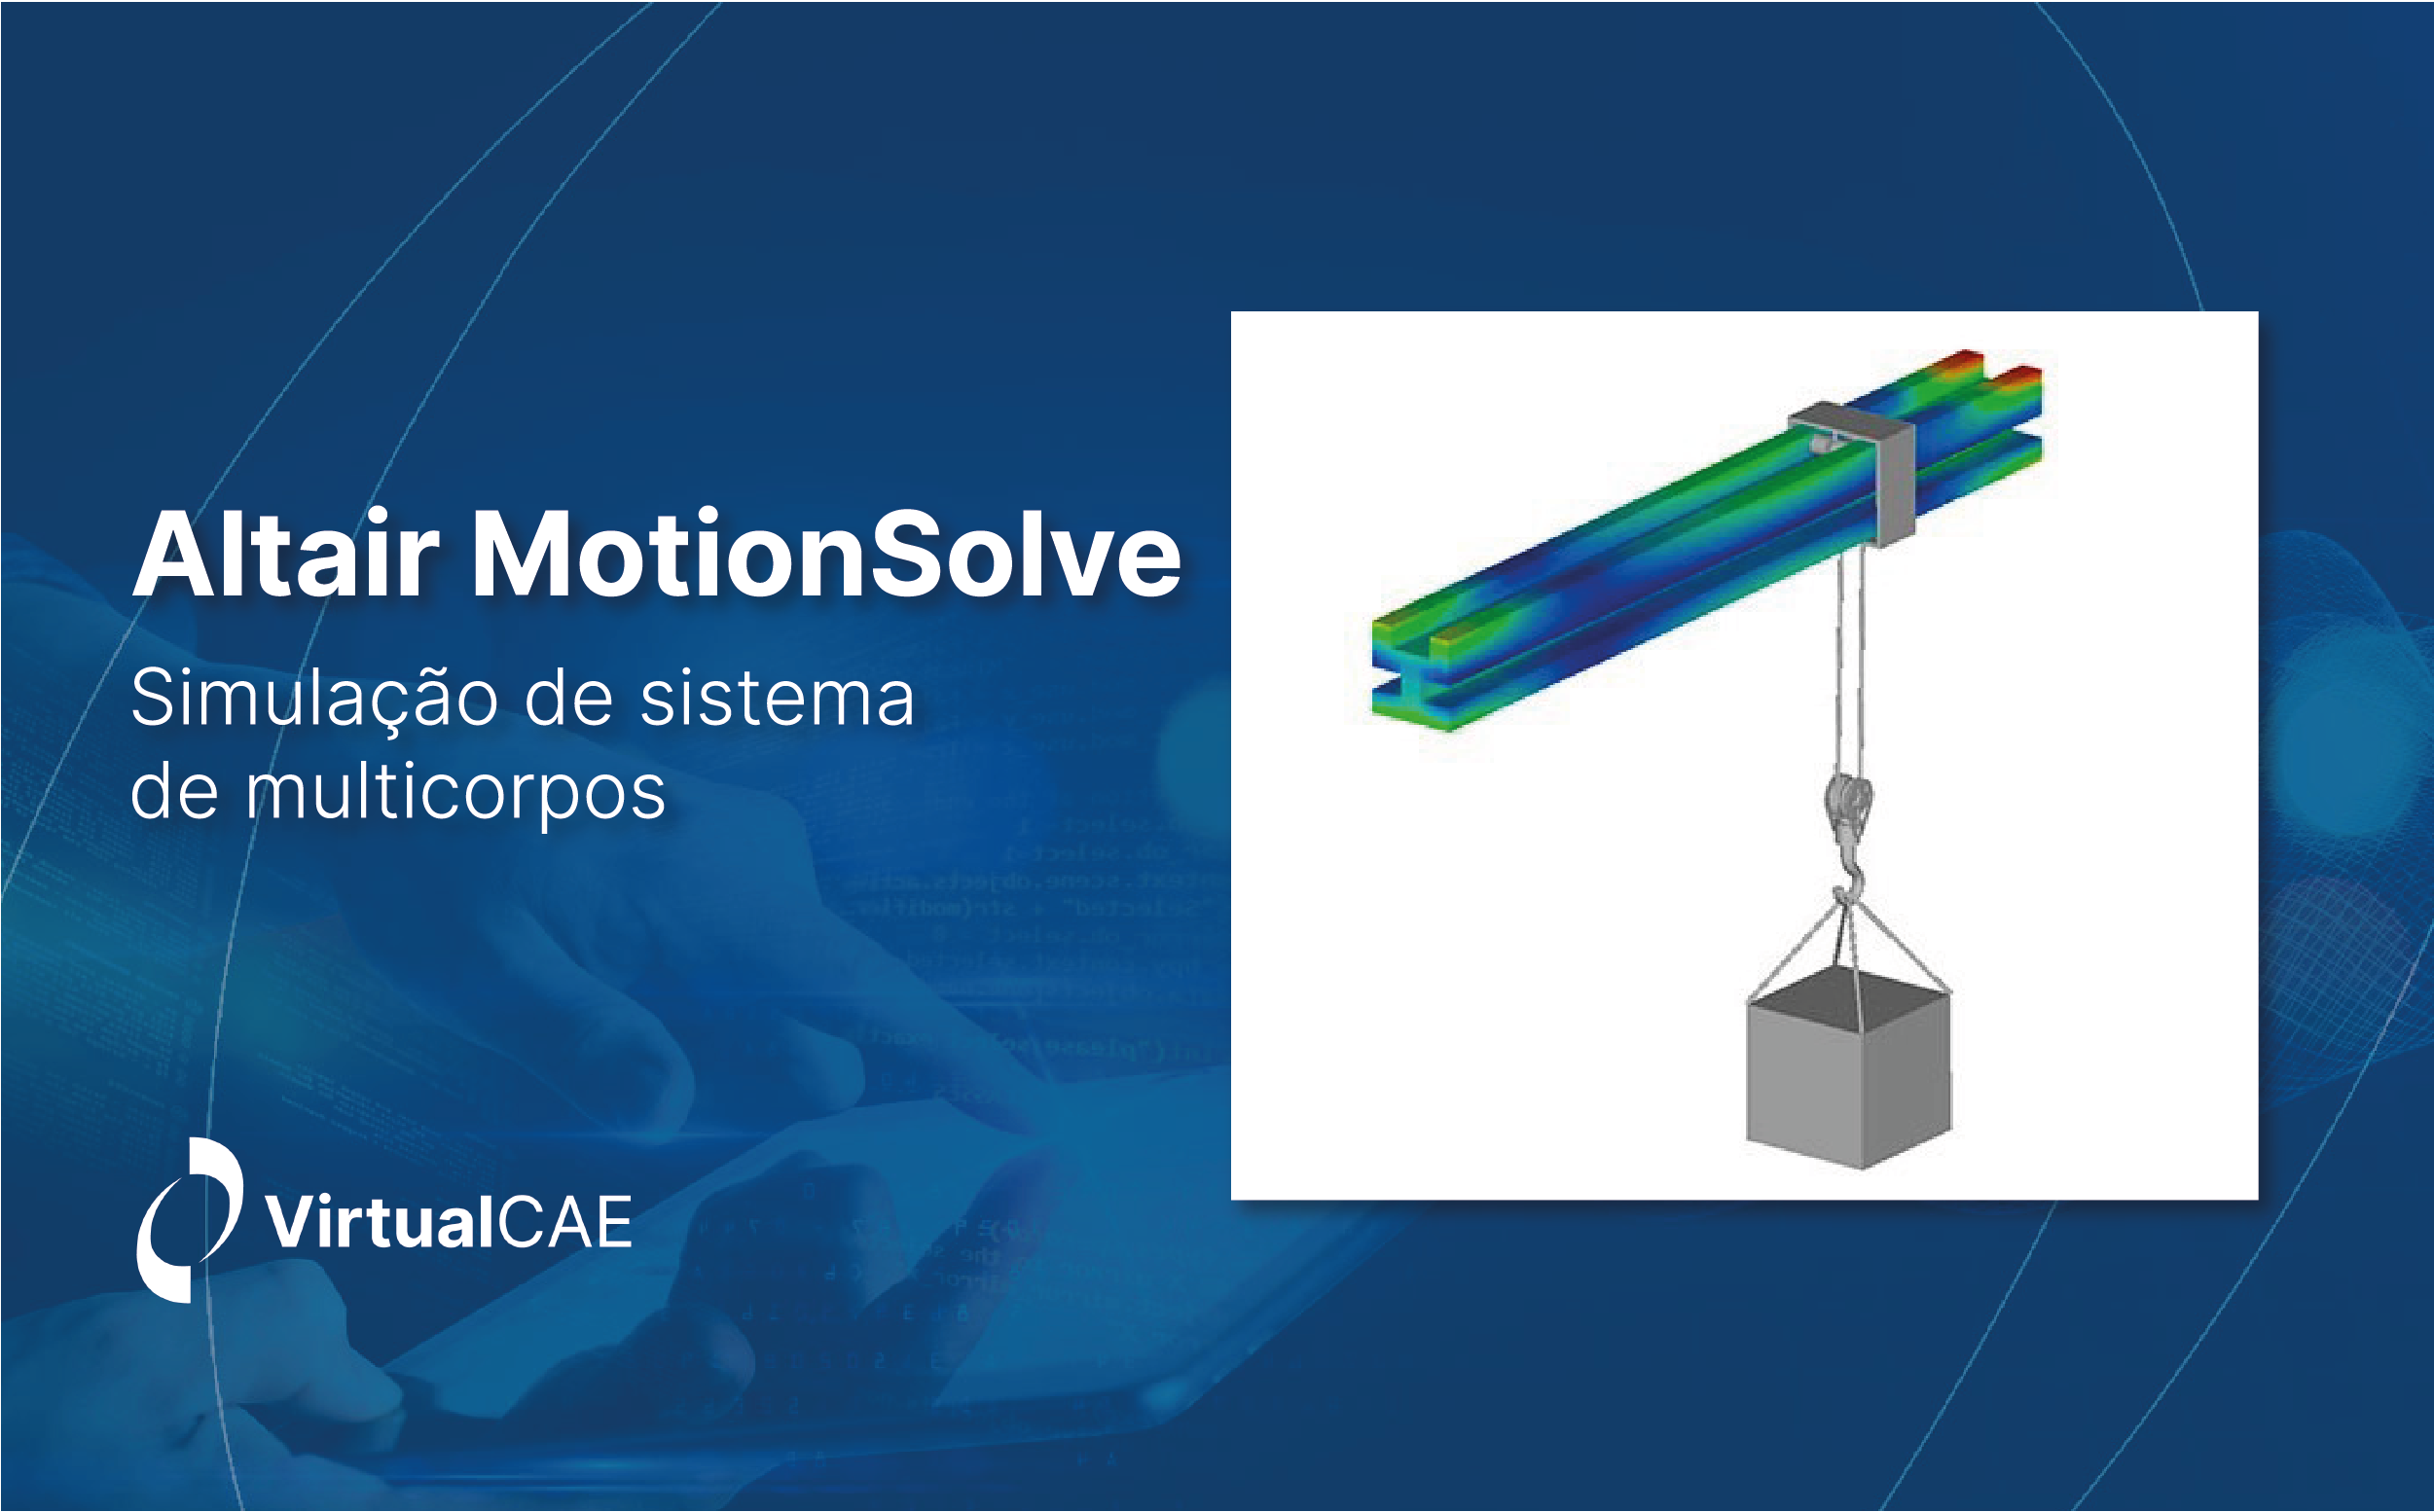 Altair MotionSolve